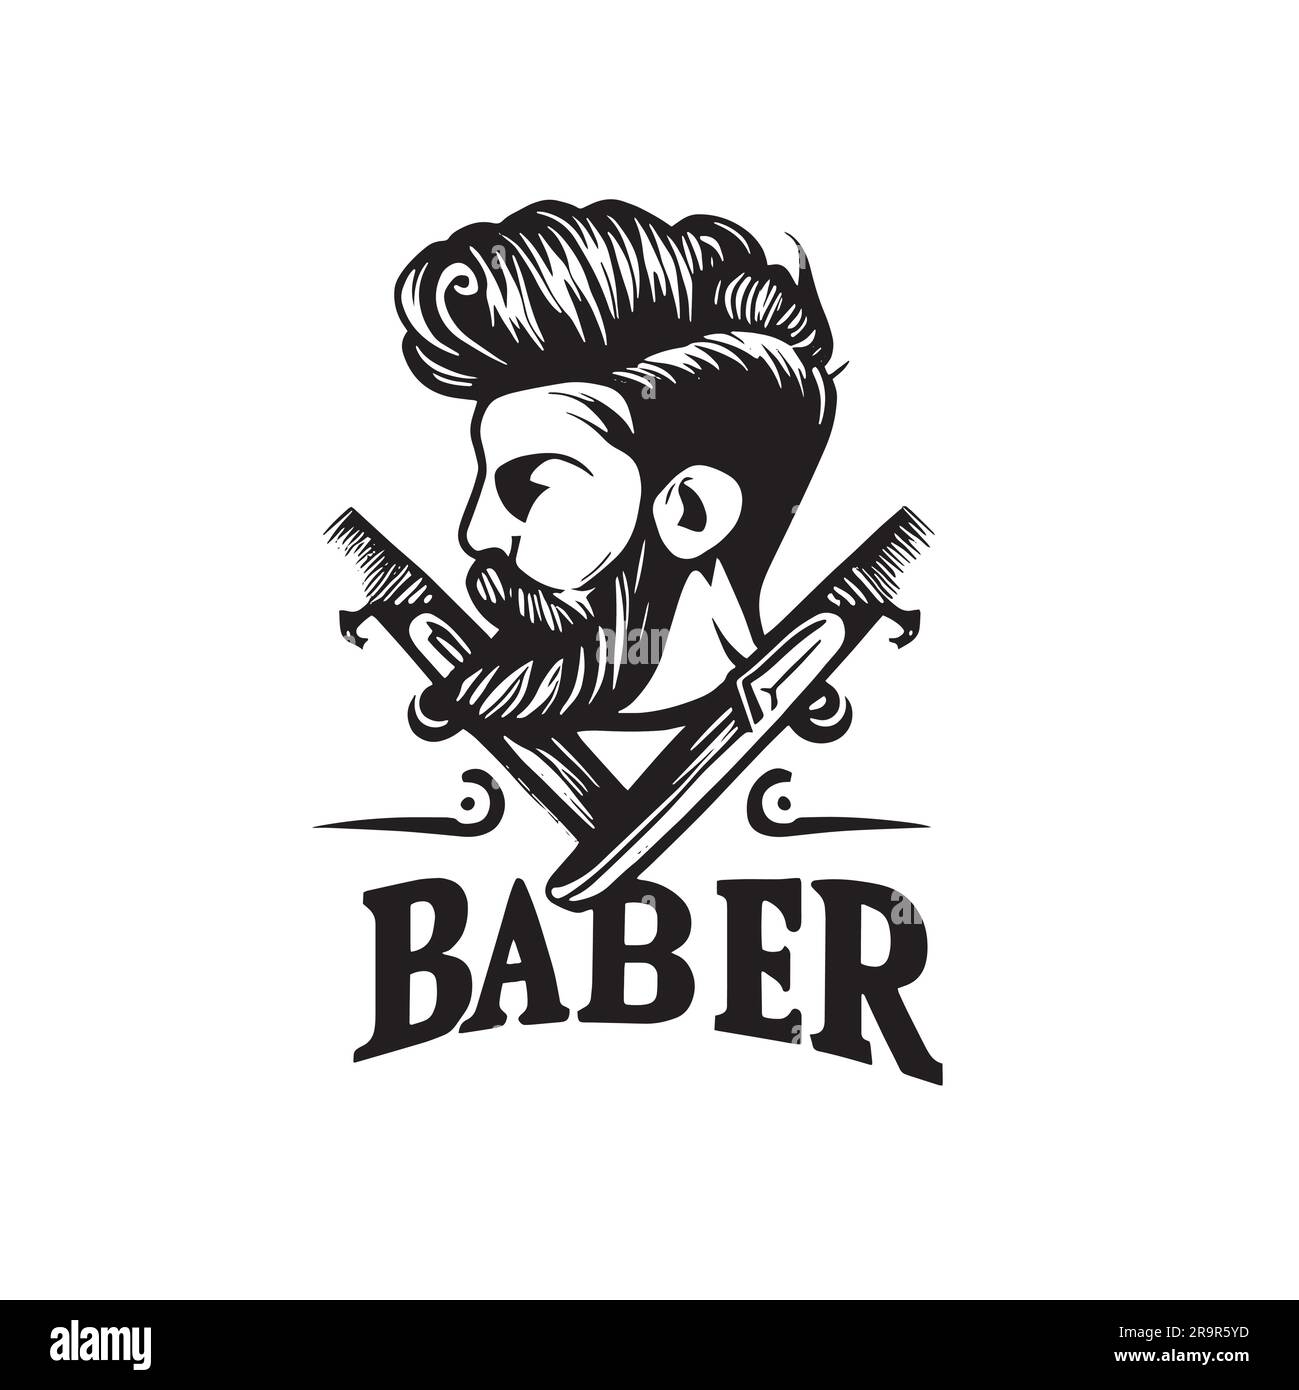 barber logo in black color on a white background Stock Vector